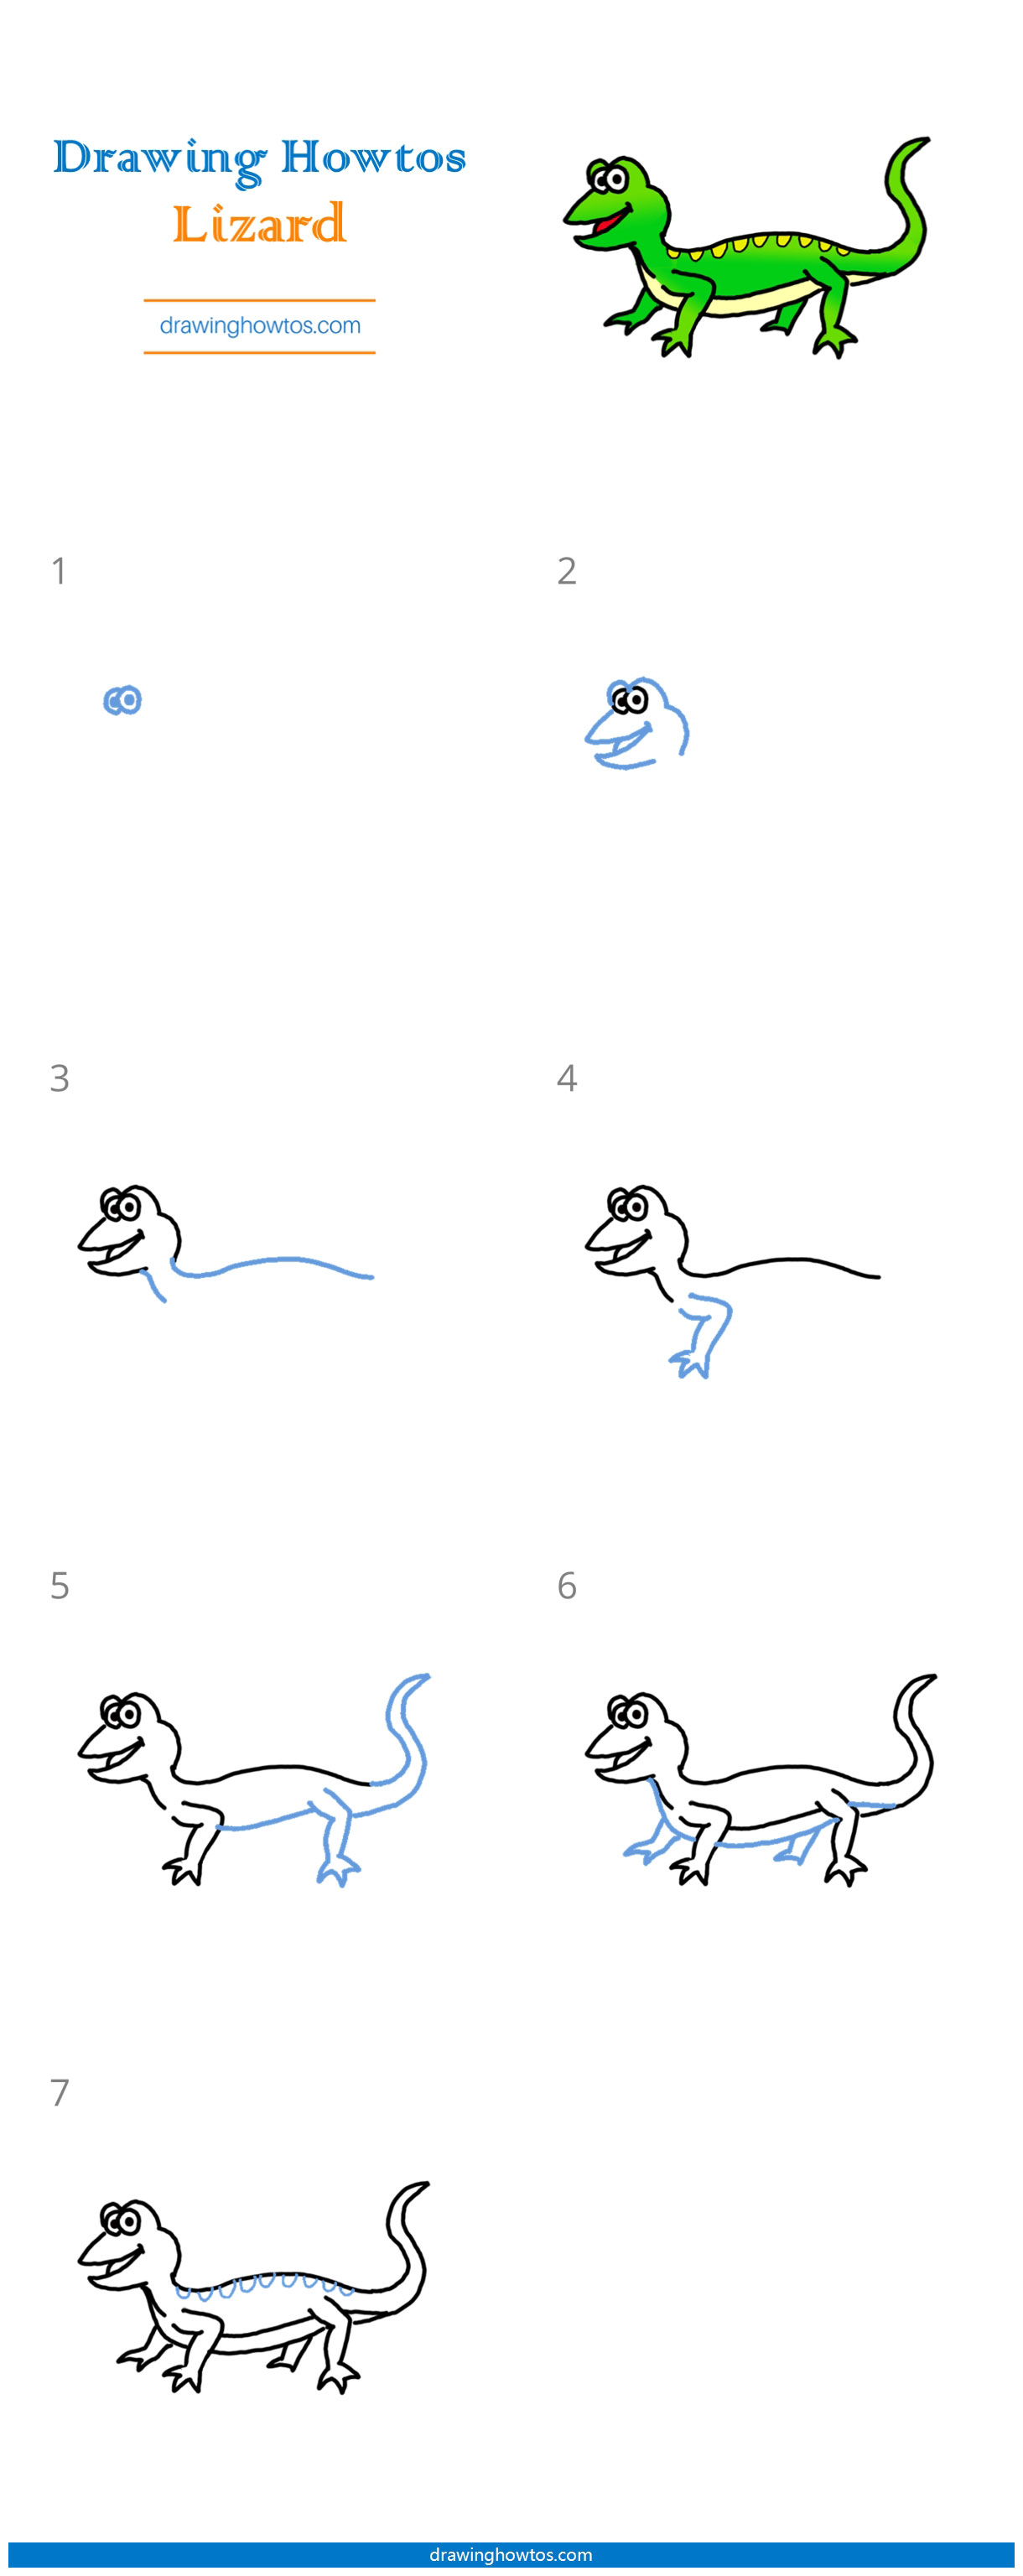 How to Draw a Lizard Step by Step